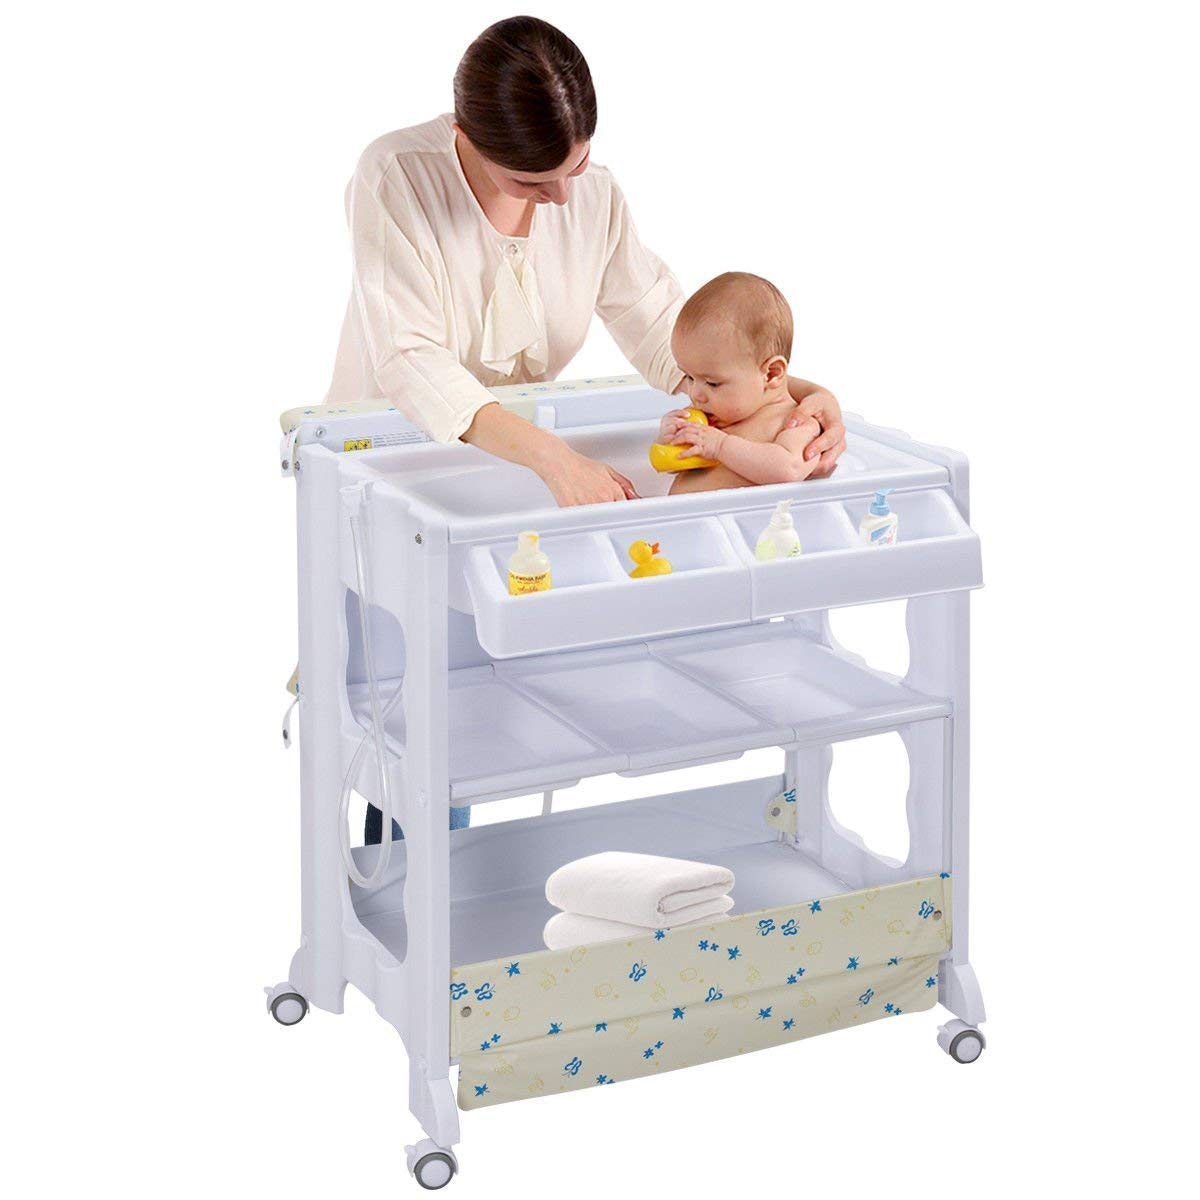 Baby Bath and Changing Table, Diaper Organizer for Infant with Tube &